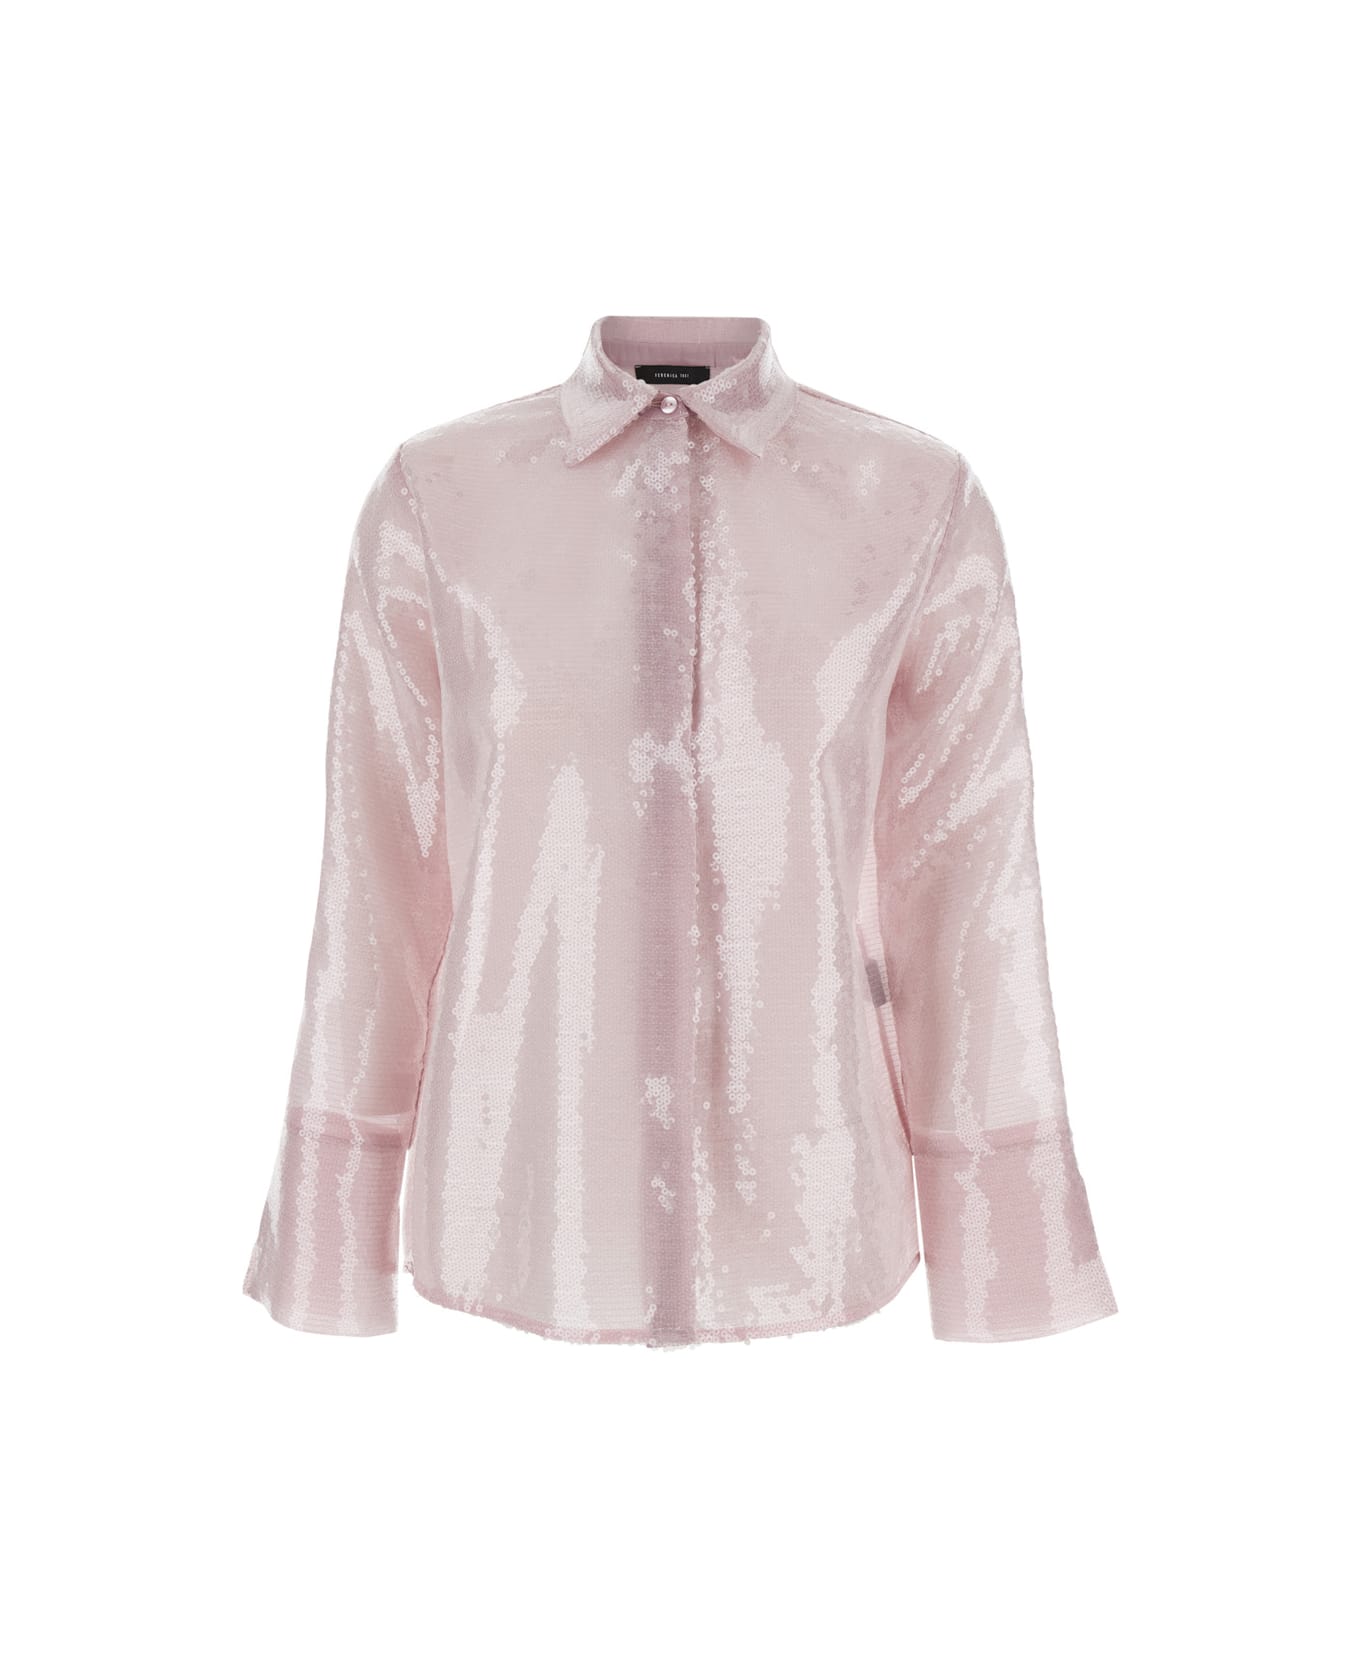 Federica Tosi Pink Shirt With Sequins In Techno Fabric Woman - Pink